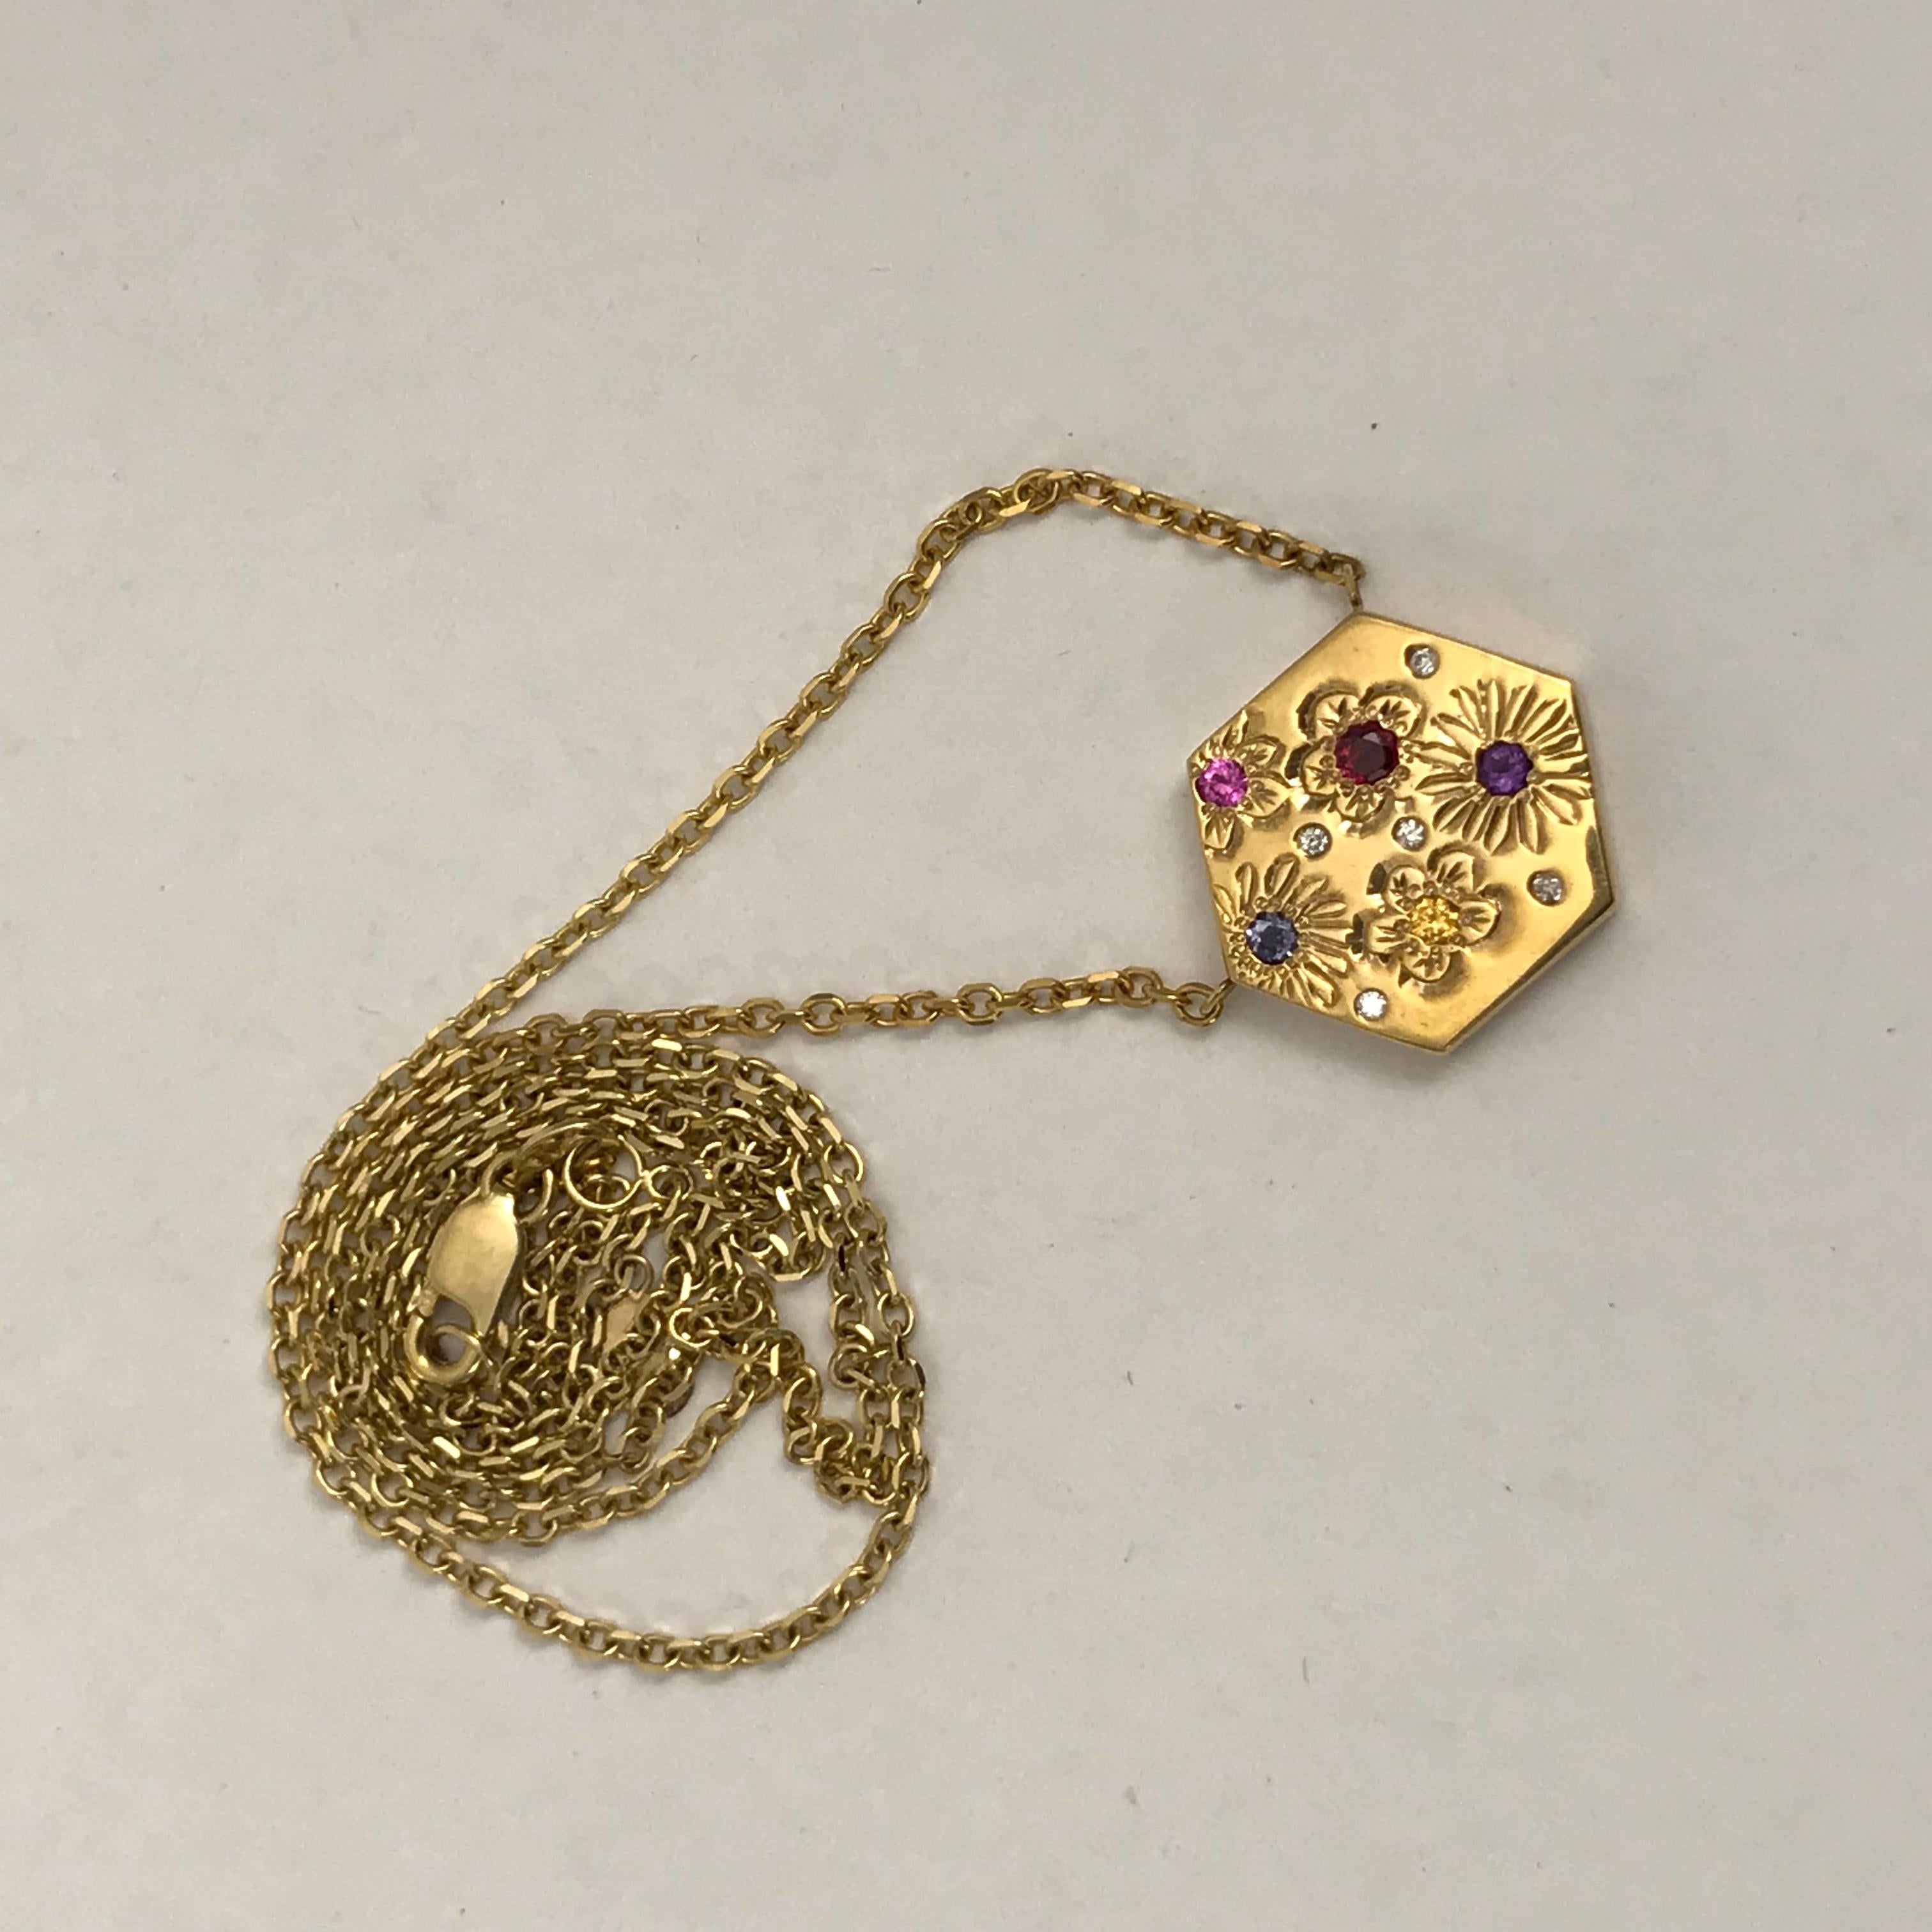 Hexagon Necklace in 14 Carat Gold and Gems-Flower Variety For Sale 1